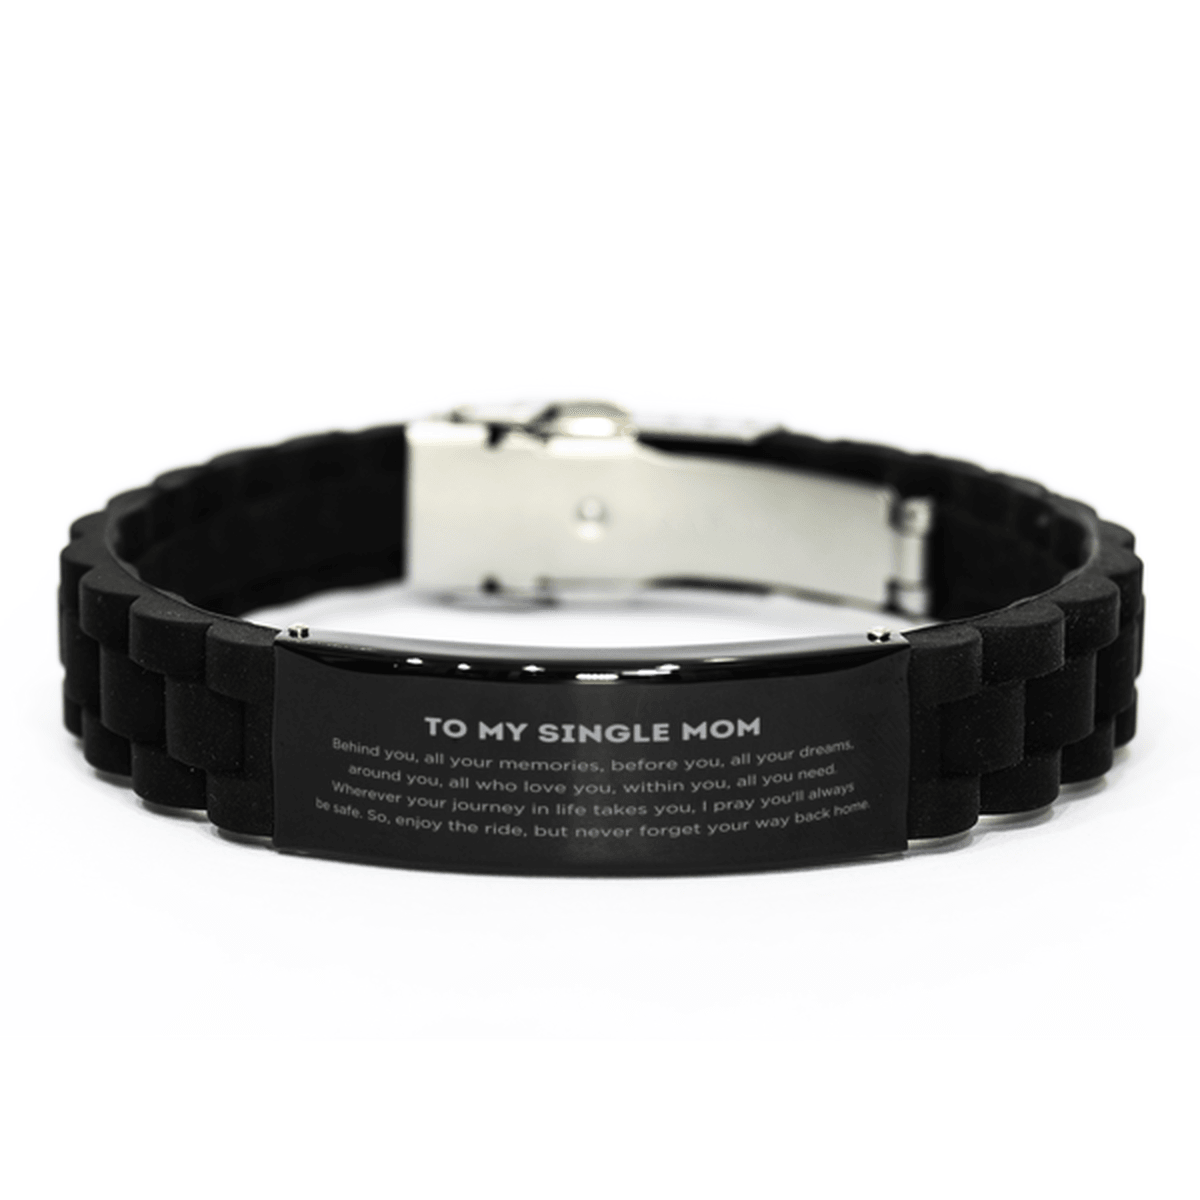 To My Single Mom Gifts, Inspirational Single Mom Black Glidelock Clasp Bracelet, Sentimental Birthday Christmas Unique Gifts For Single Mom Behind you, all your memories, before you, all your dreams, around you, all who love you, within you, all you need - Mallard Moon Gift Shop